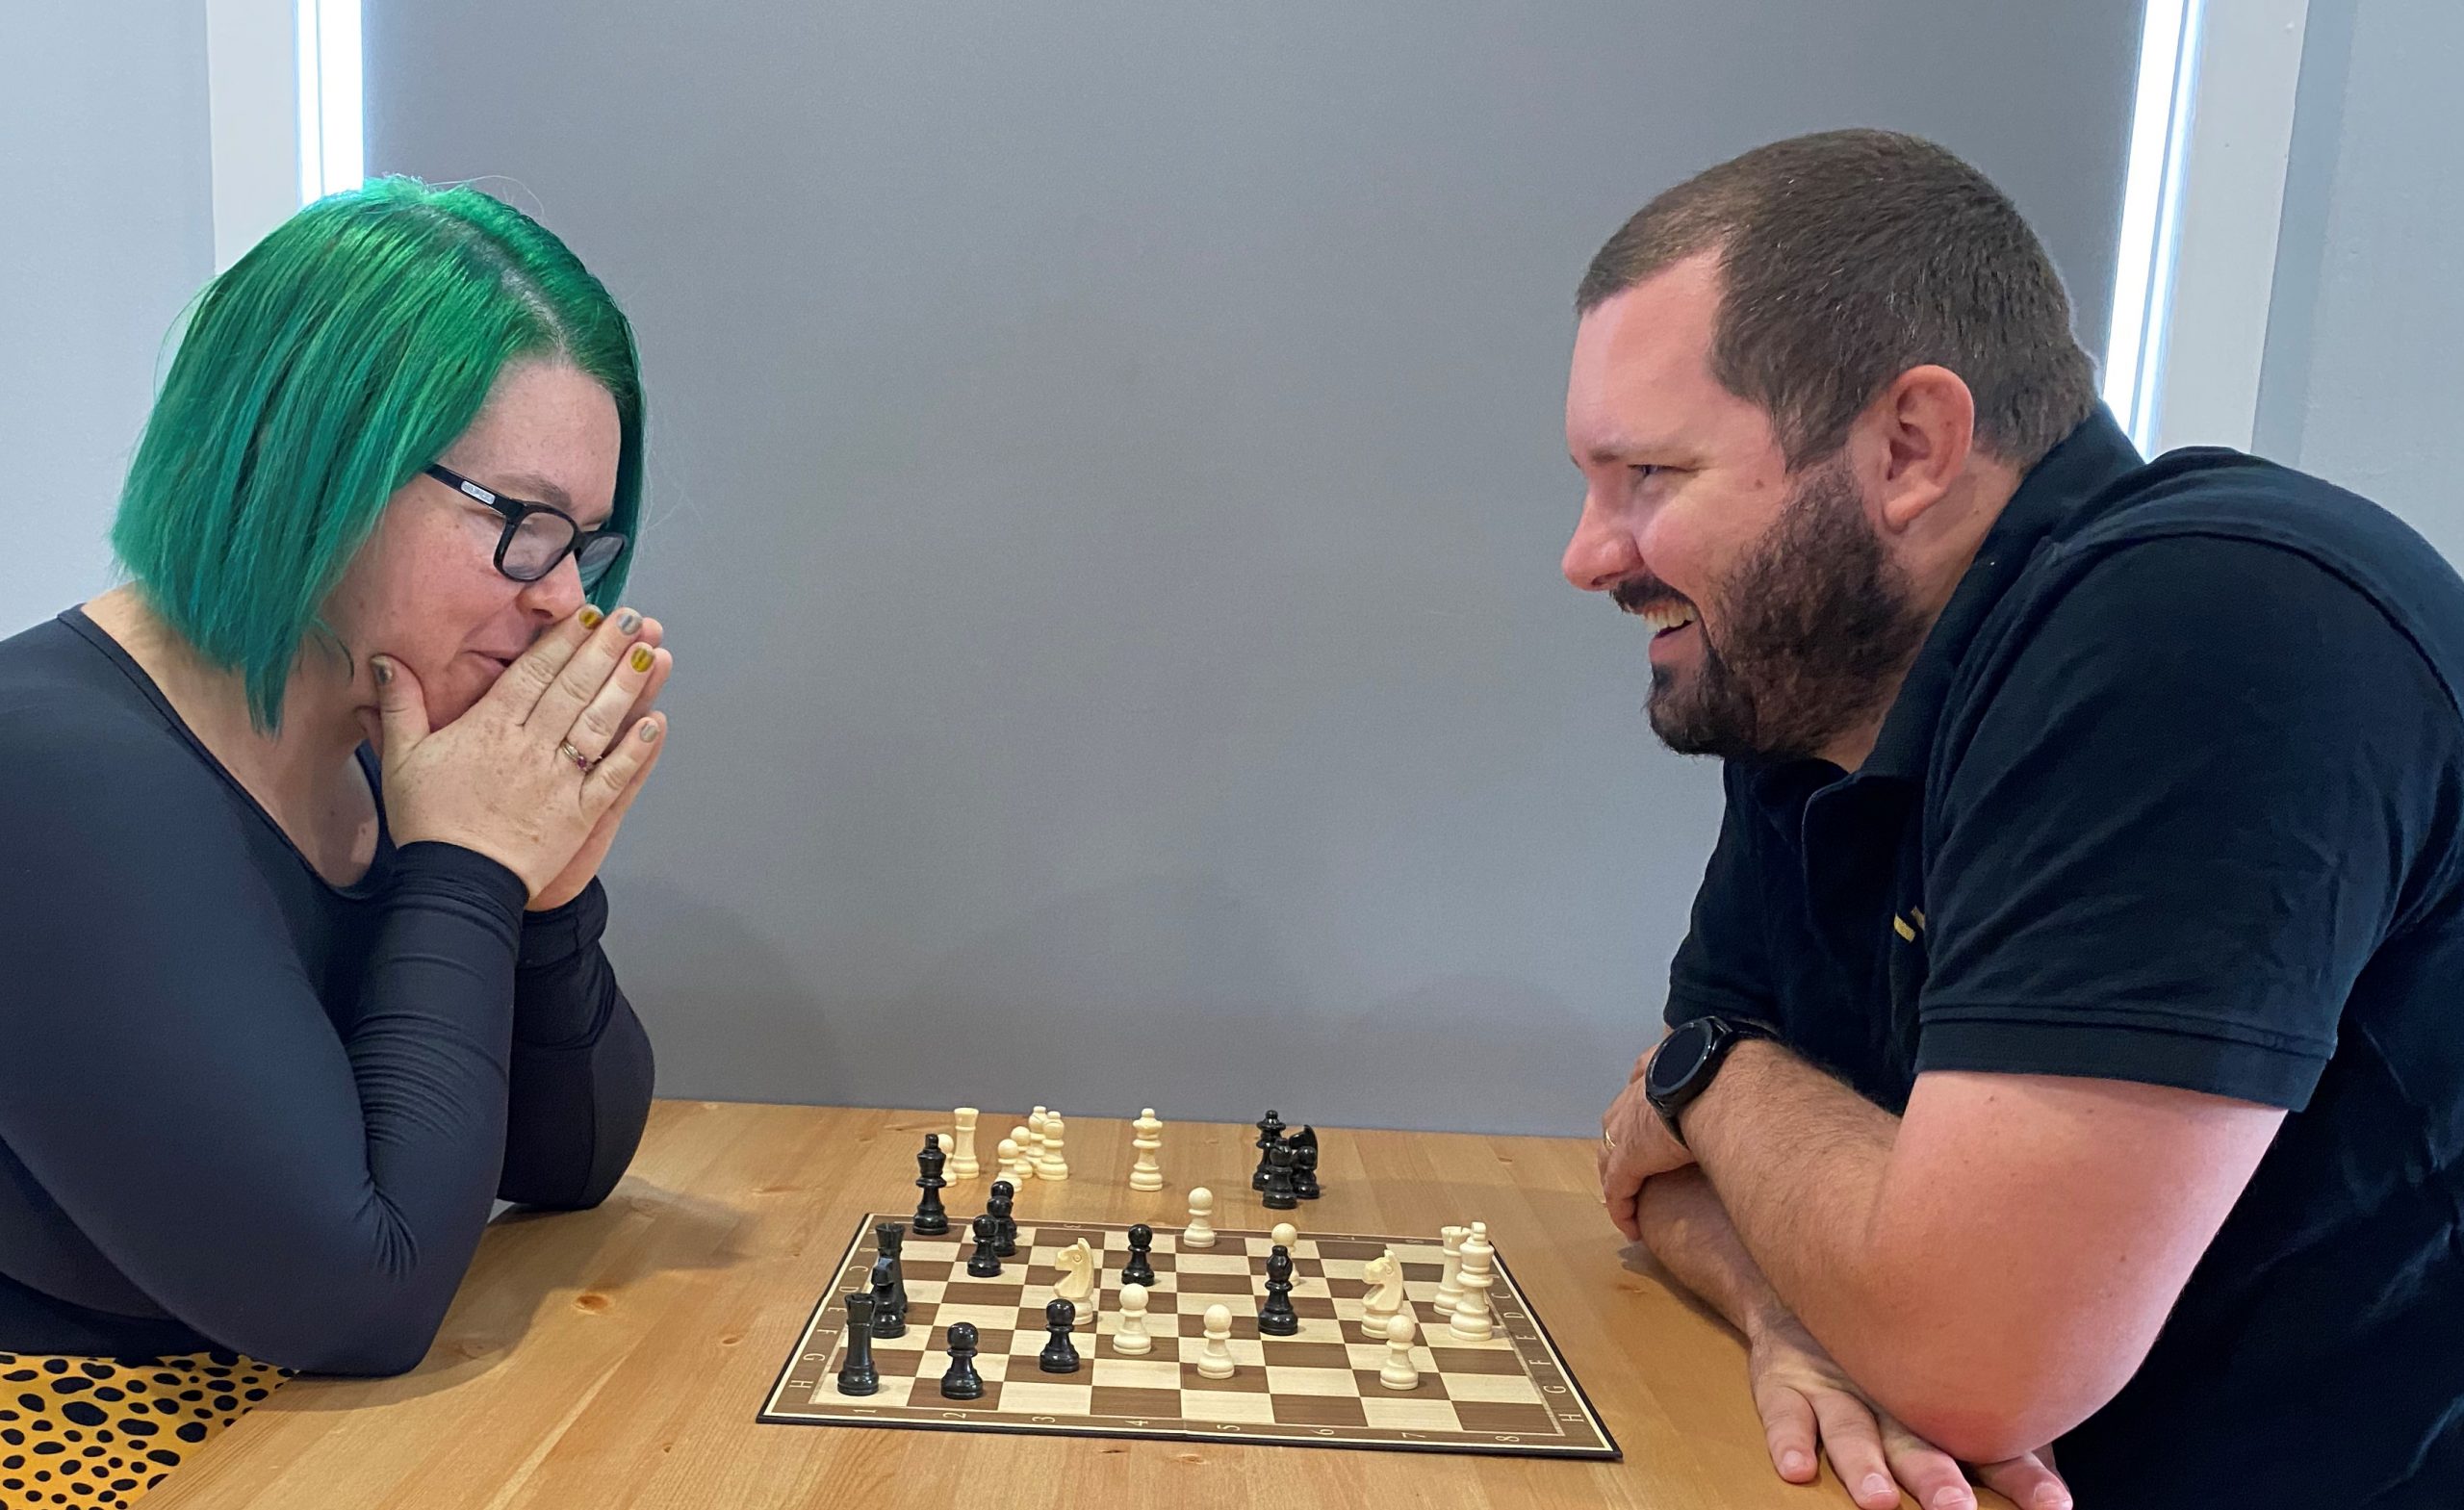 sunshine coast bookkeeping services sarah-jane and anthony playing chess bishops bookkeeping solutions